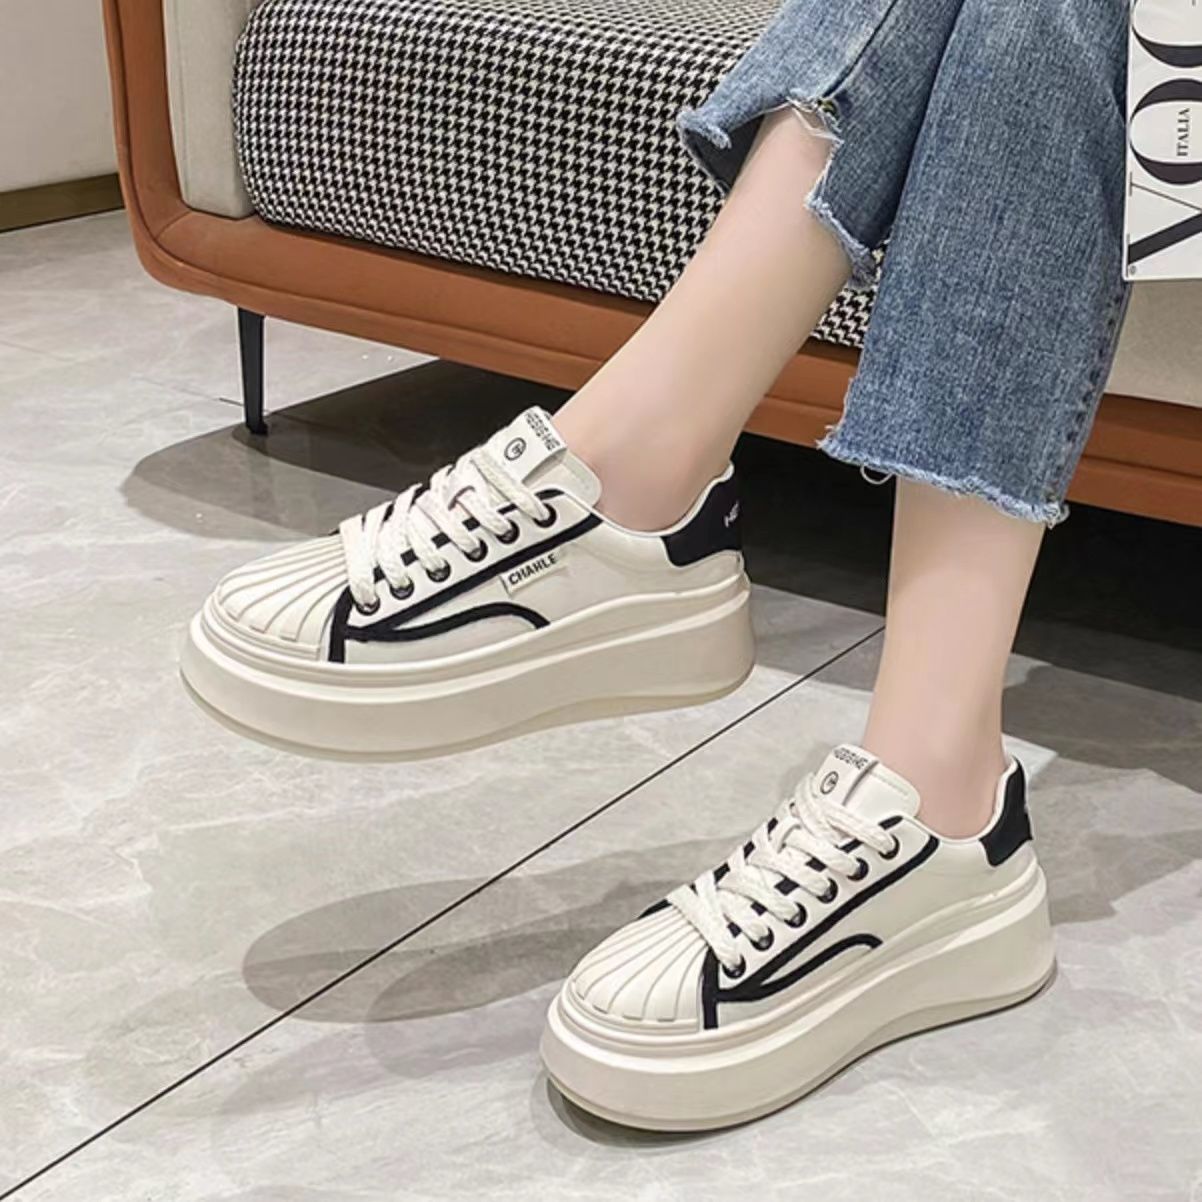 Small white shoes women's original niche skate shoes women's  new shell head thick bottom casual all-match spring single shoes trendy